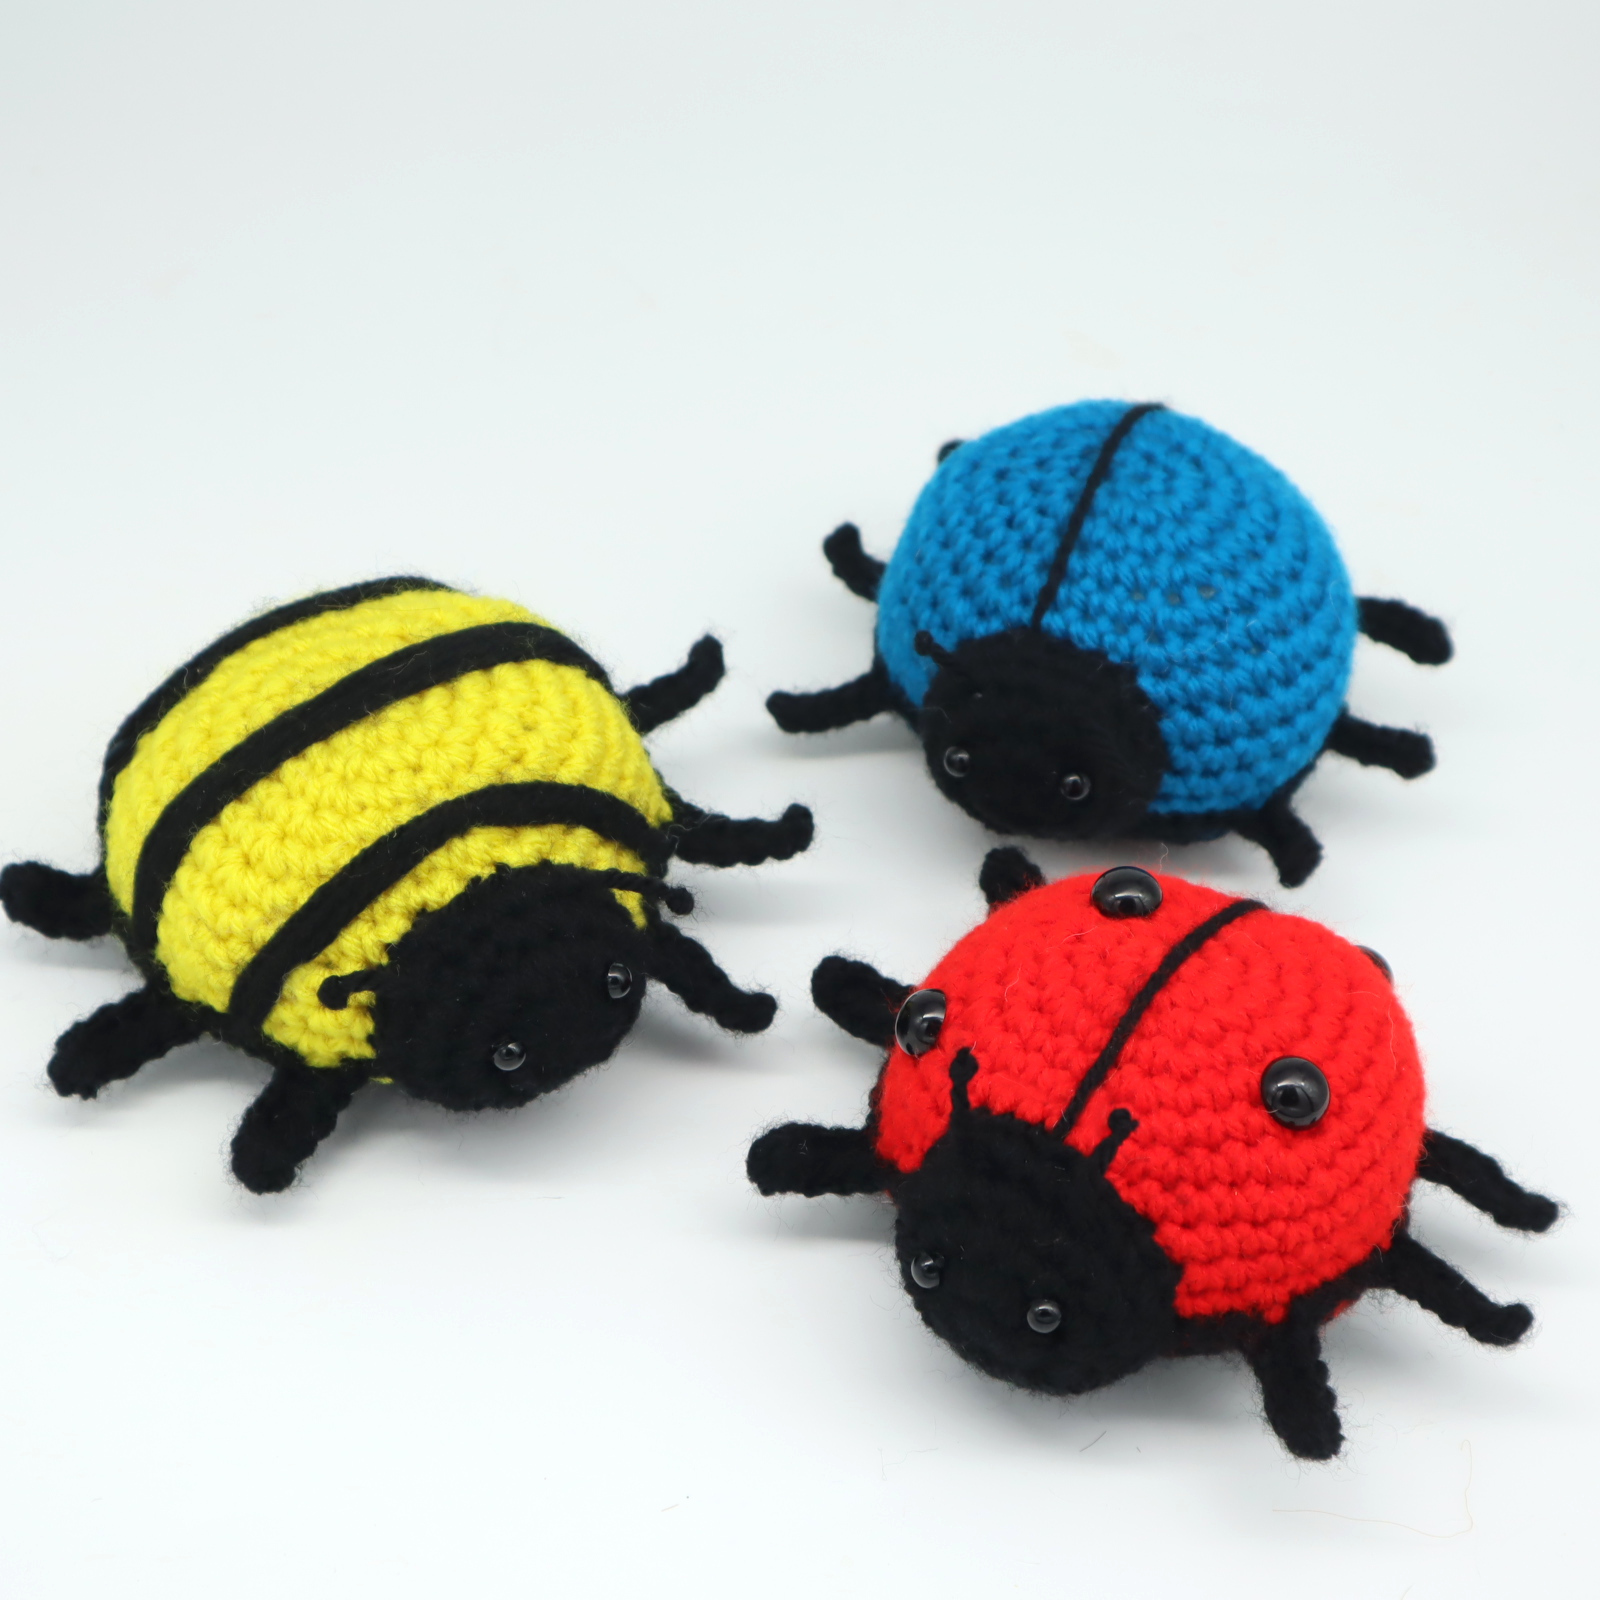 Crocheted Toy Bugs